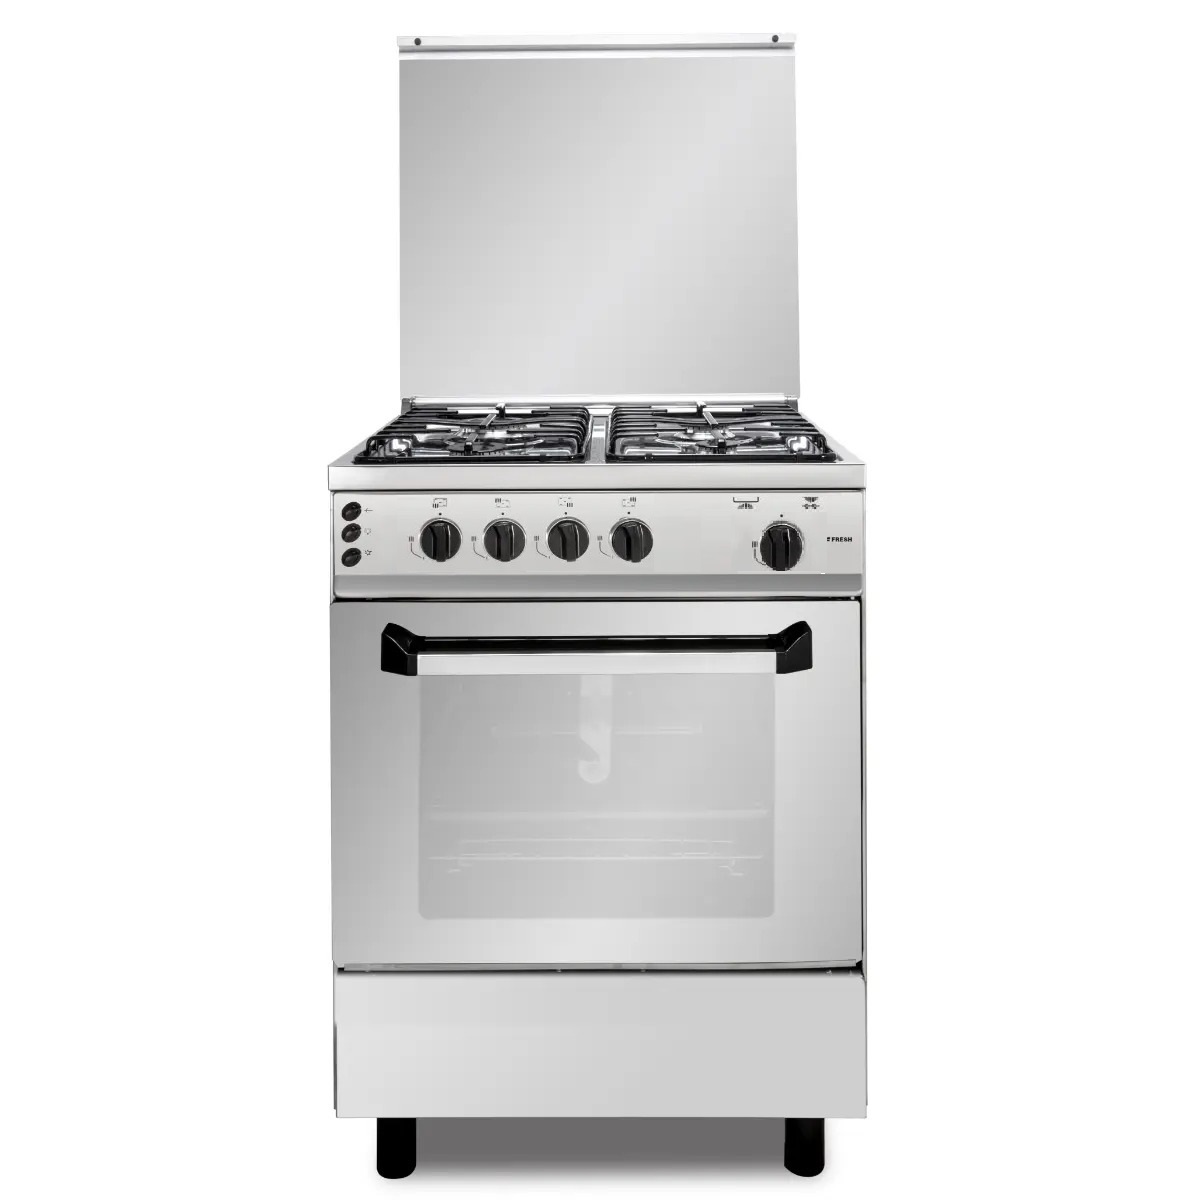 Fresh Master Gas Cooker, 4 Burners, Silver - 17281